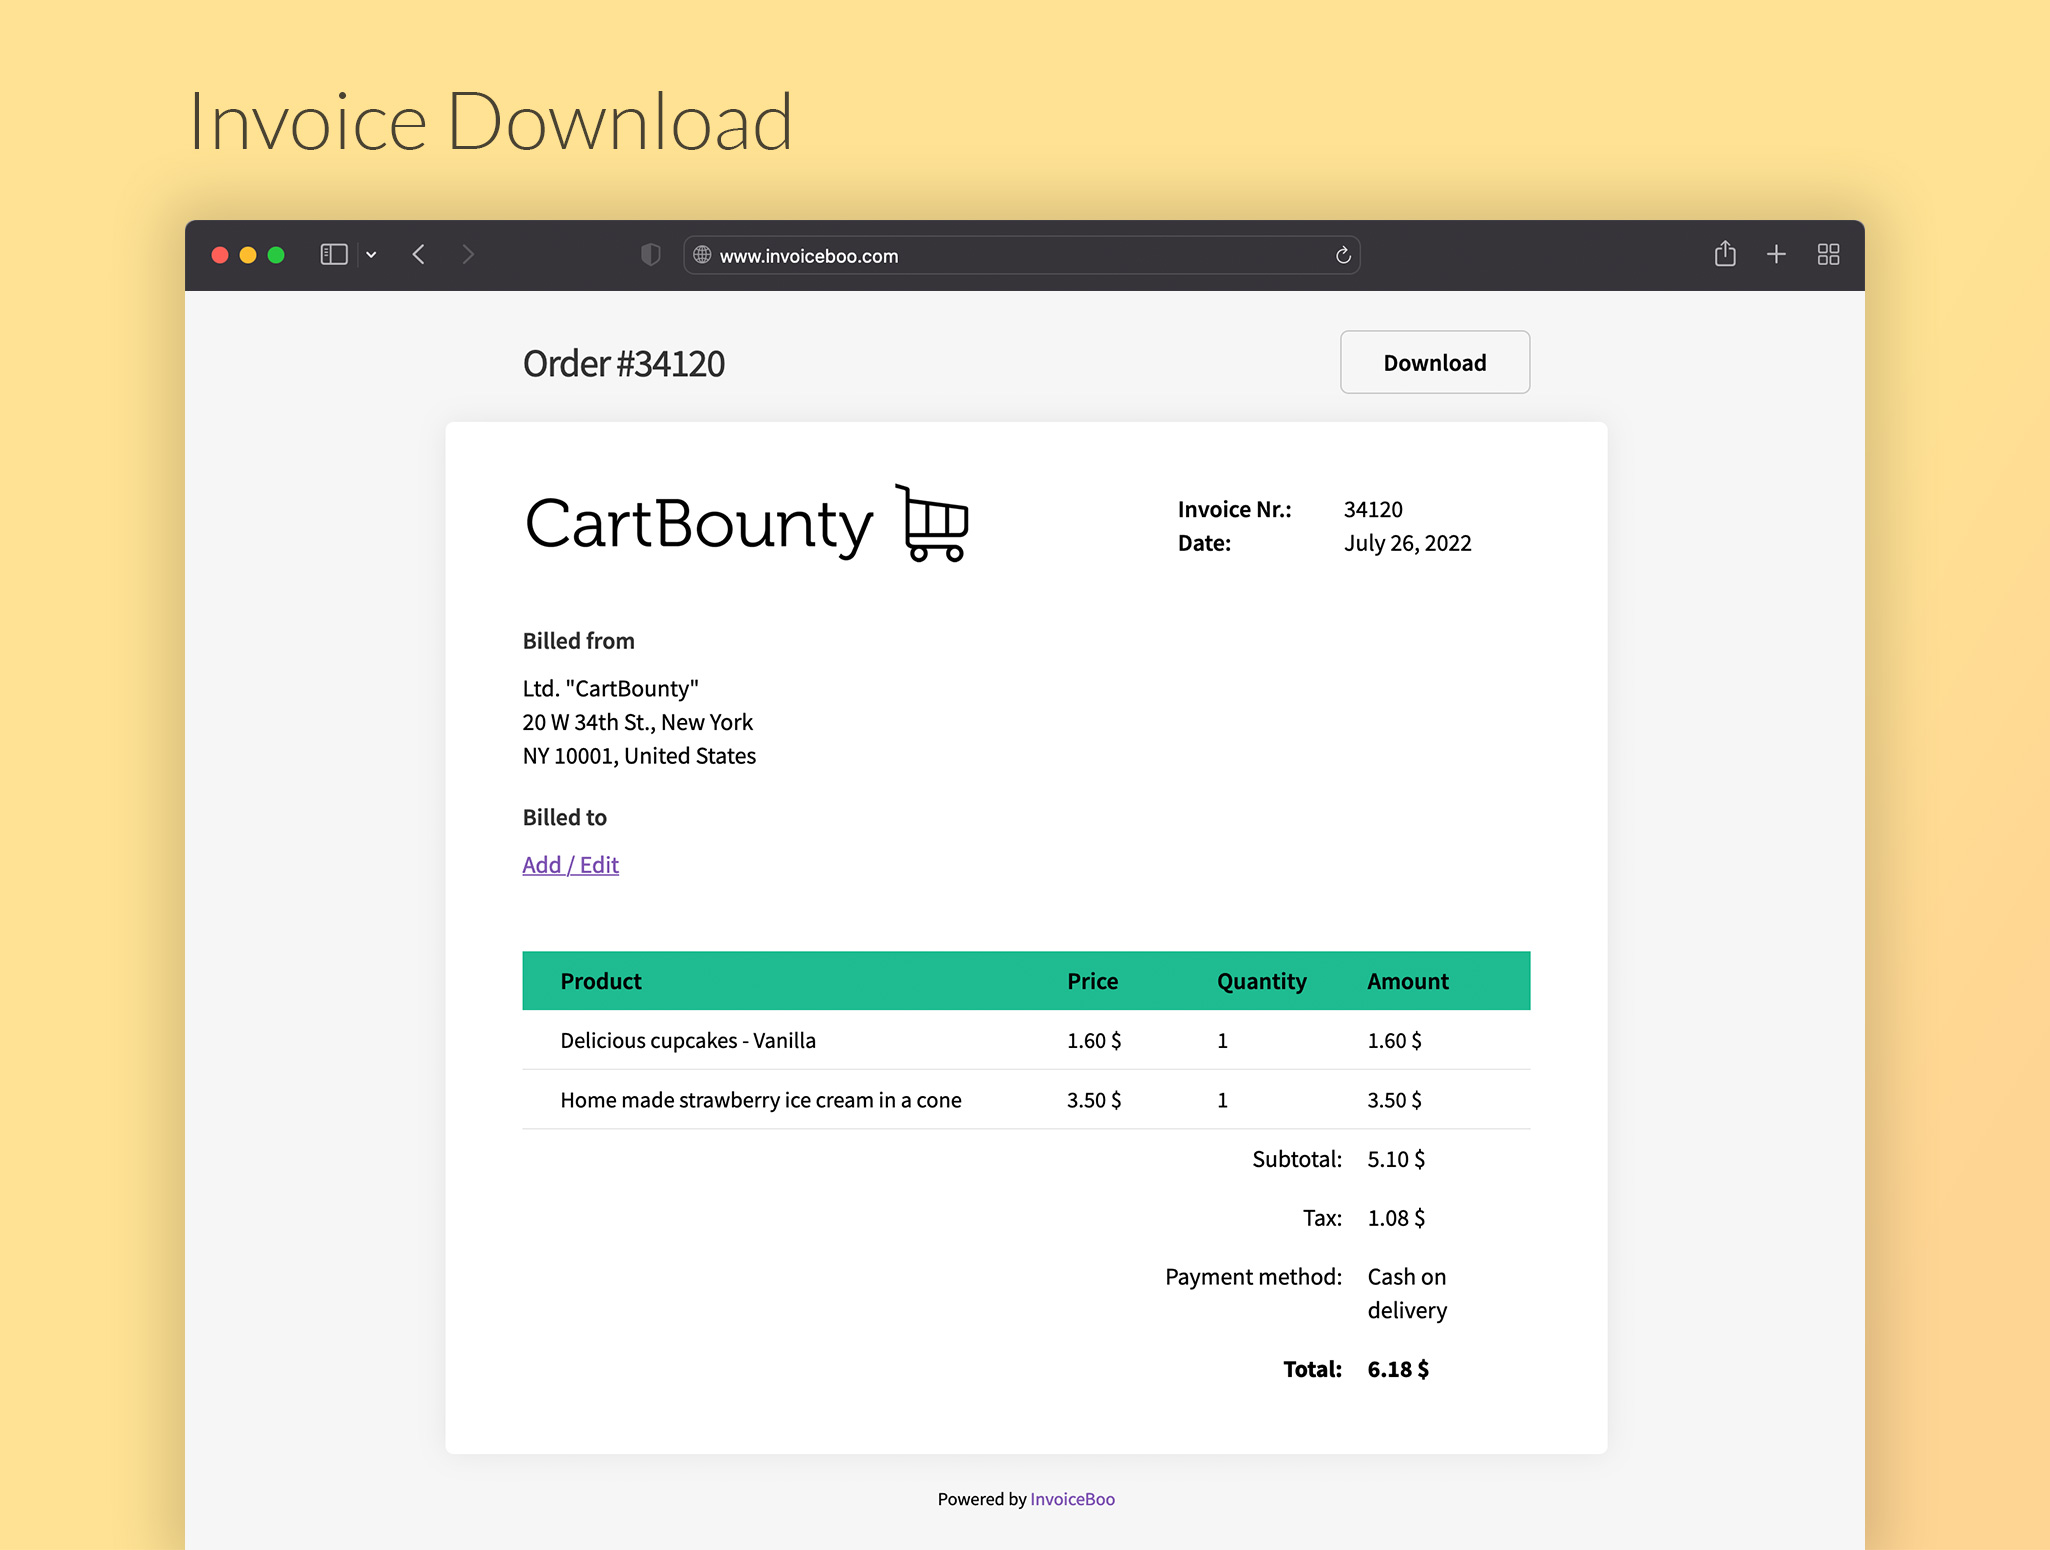 Customer Invoice update and download page